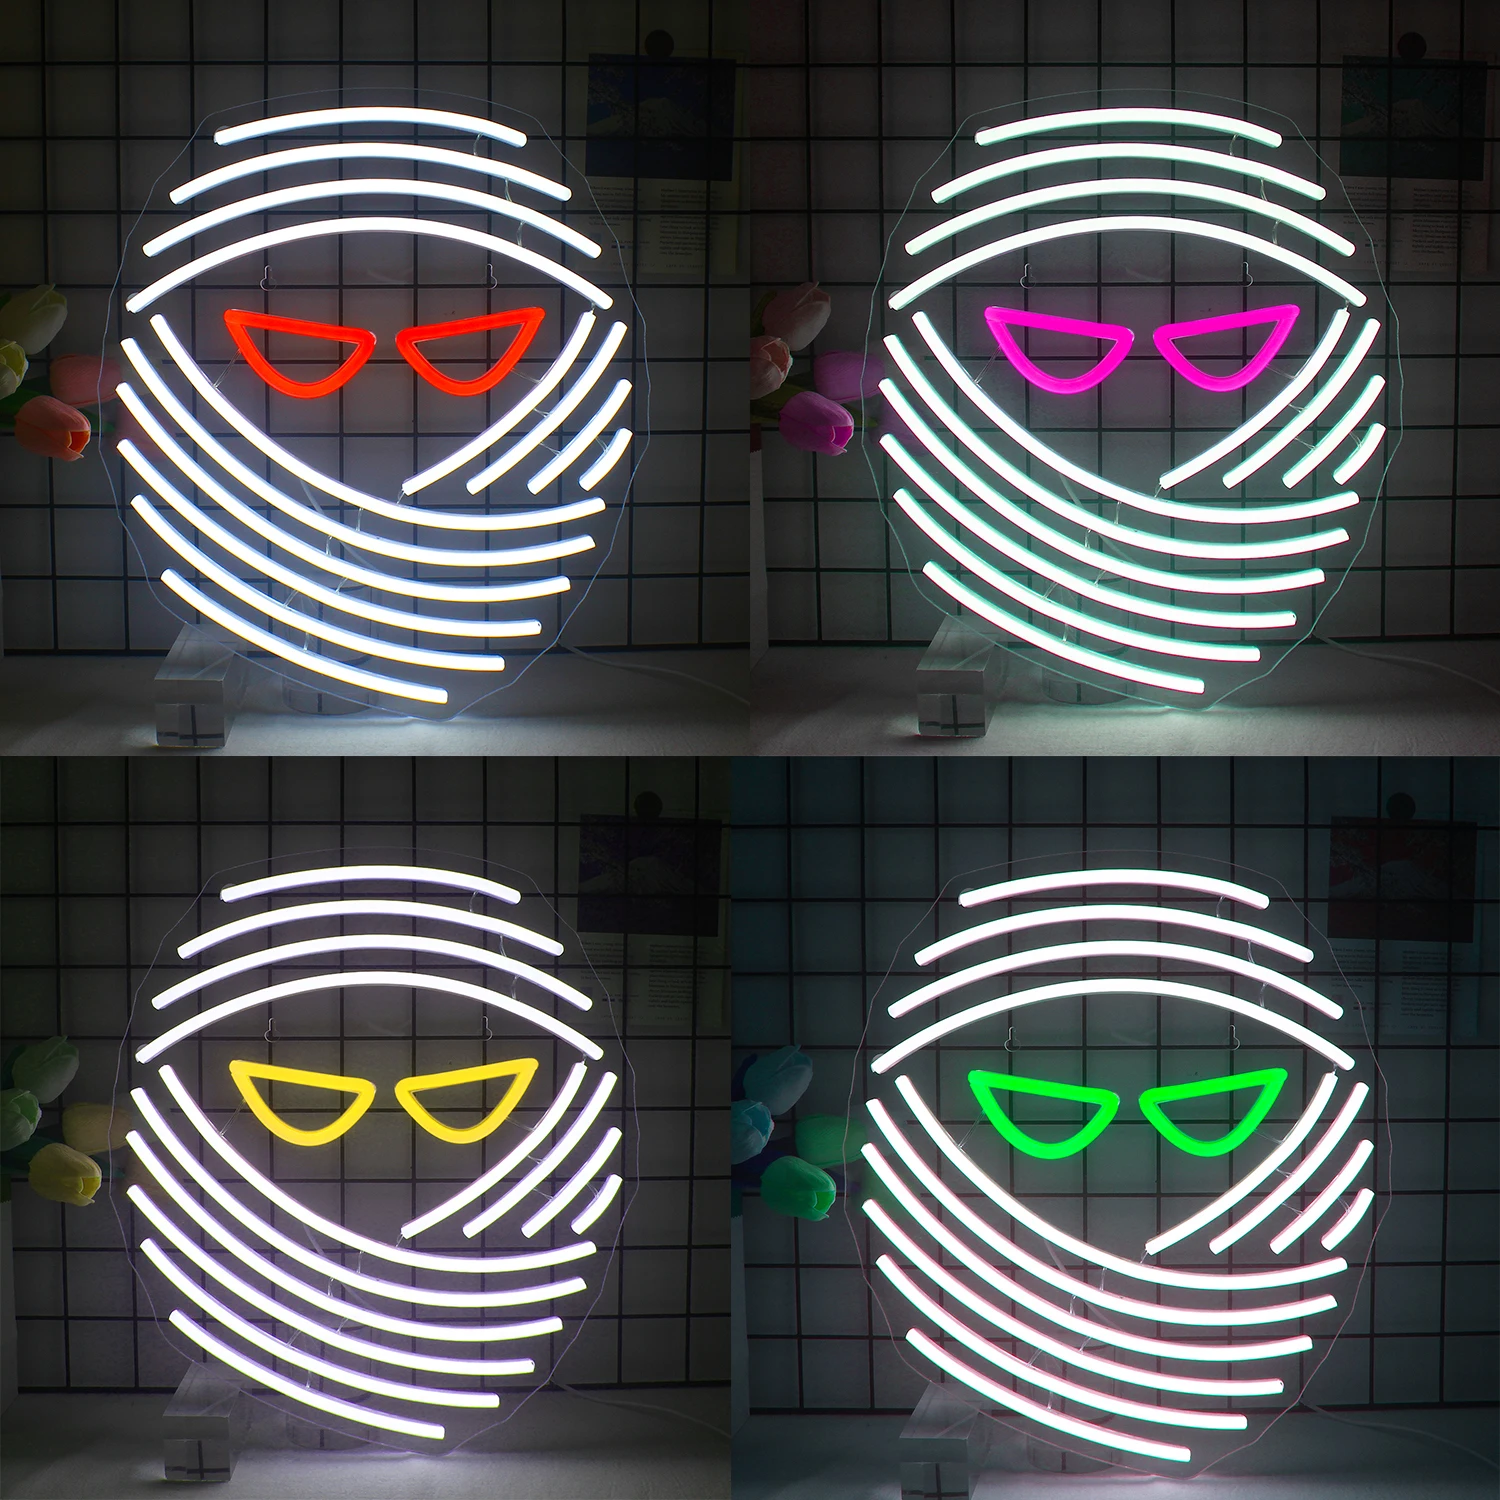 

Mummy Neon Light Masked Face Neon Glow Sign for Man Cave sign Bar Party Bedroom Home Decor Cosplay Atmosphere Decorative Light